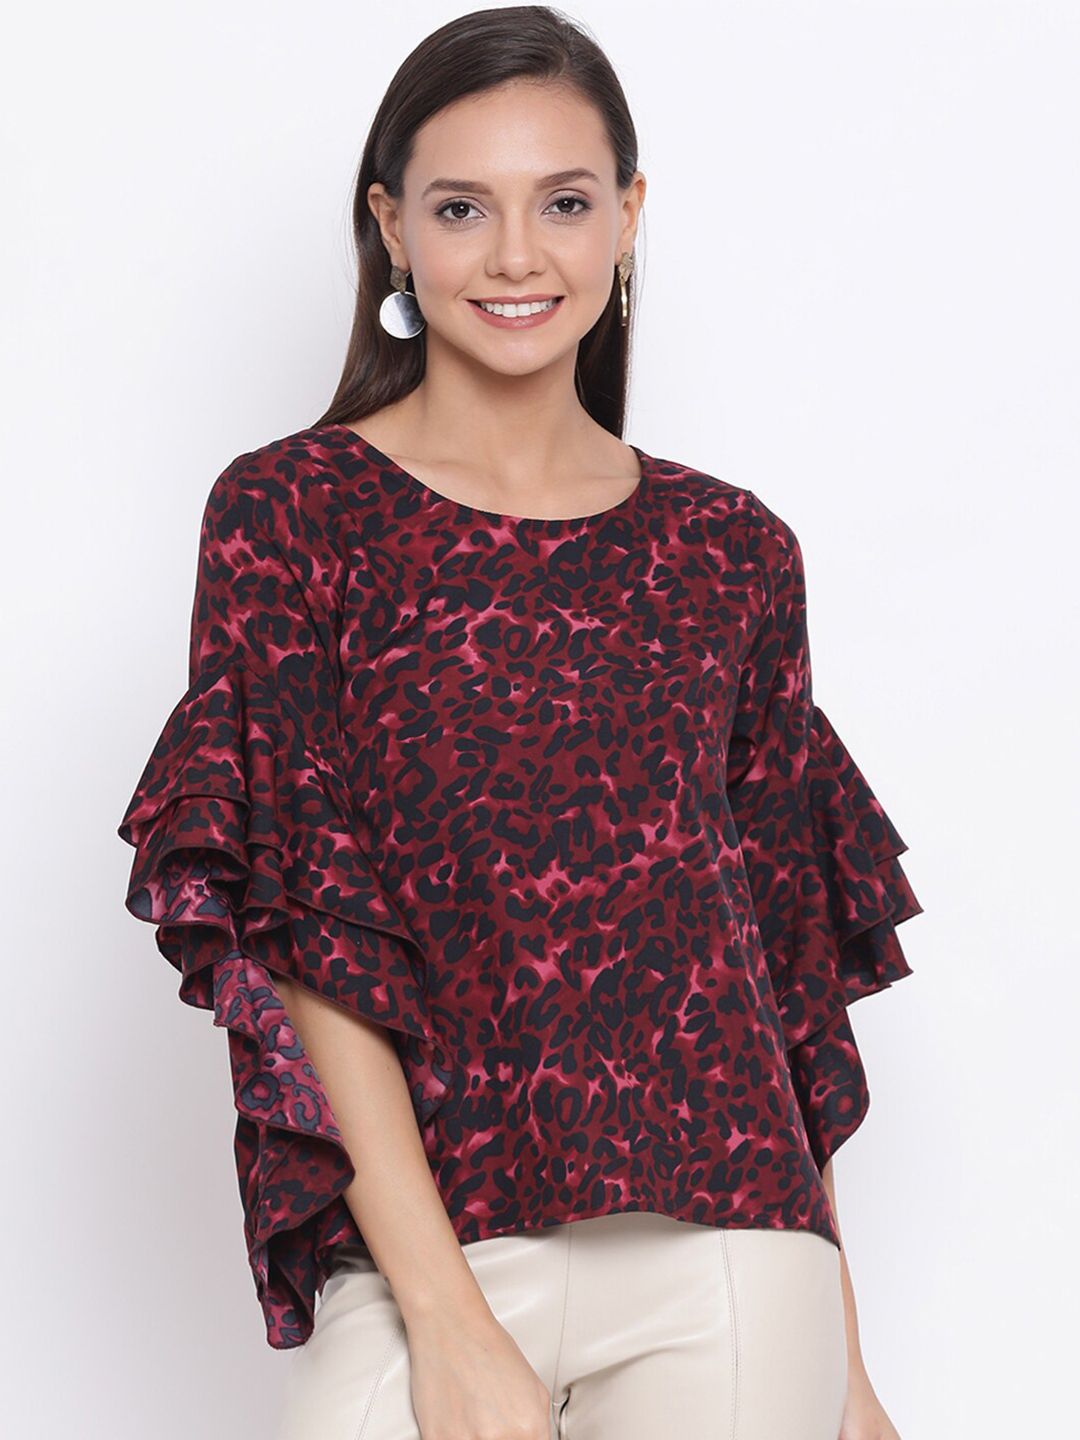 DRAAX Fashions Pink Floral Print Chiffon Top Price in India